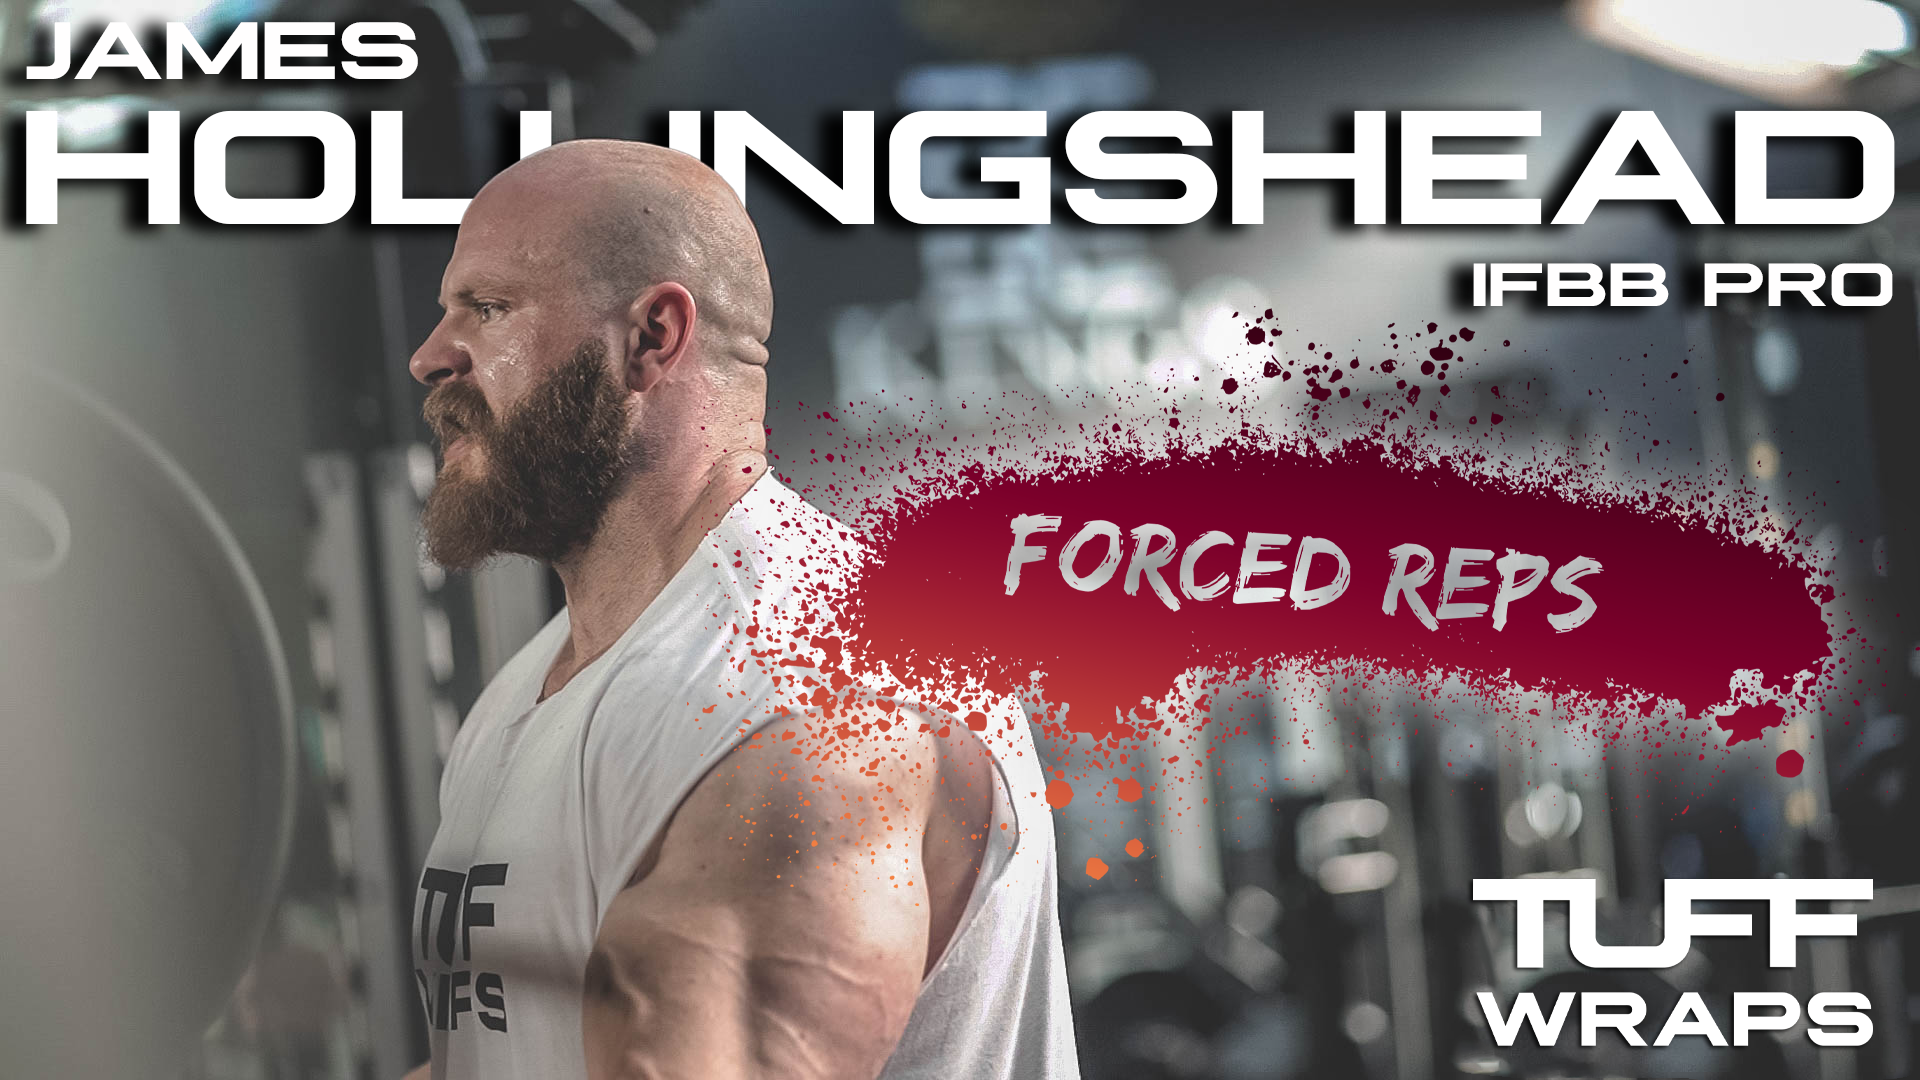 Forced Reps With IFBB Pro James Hollingshead